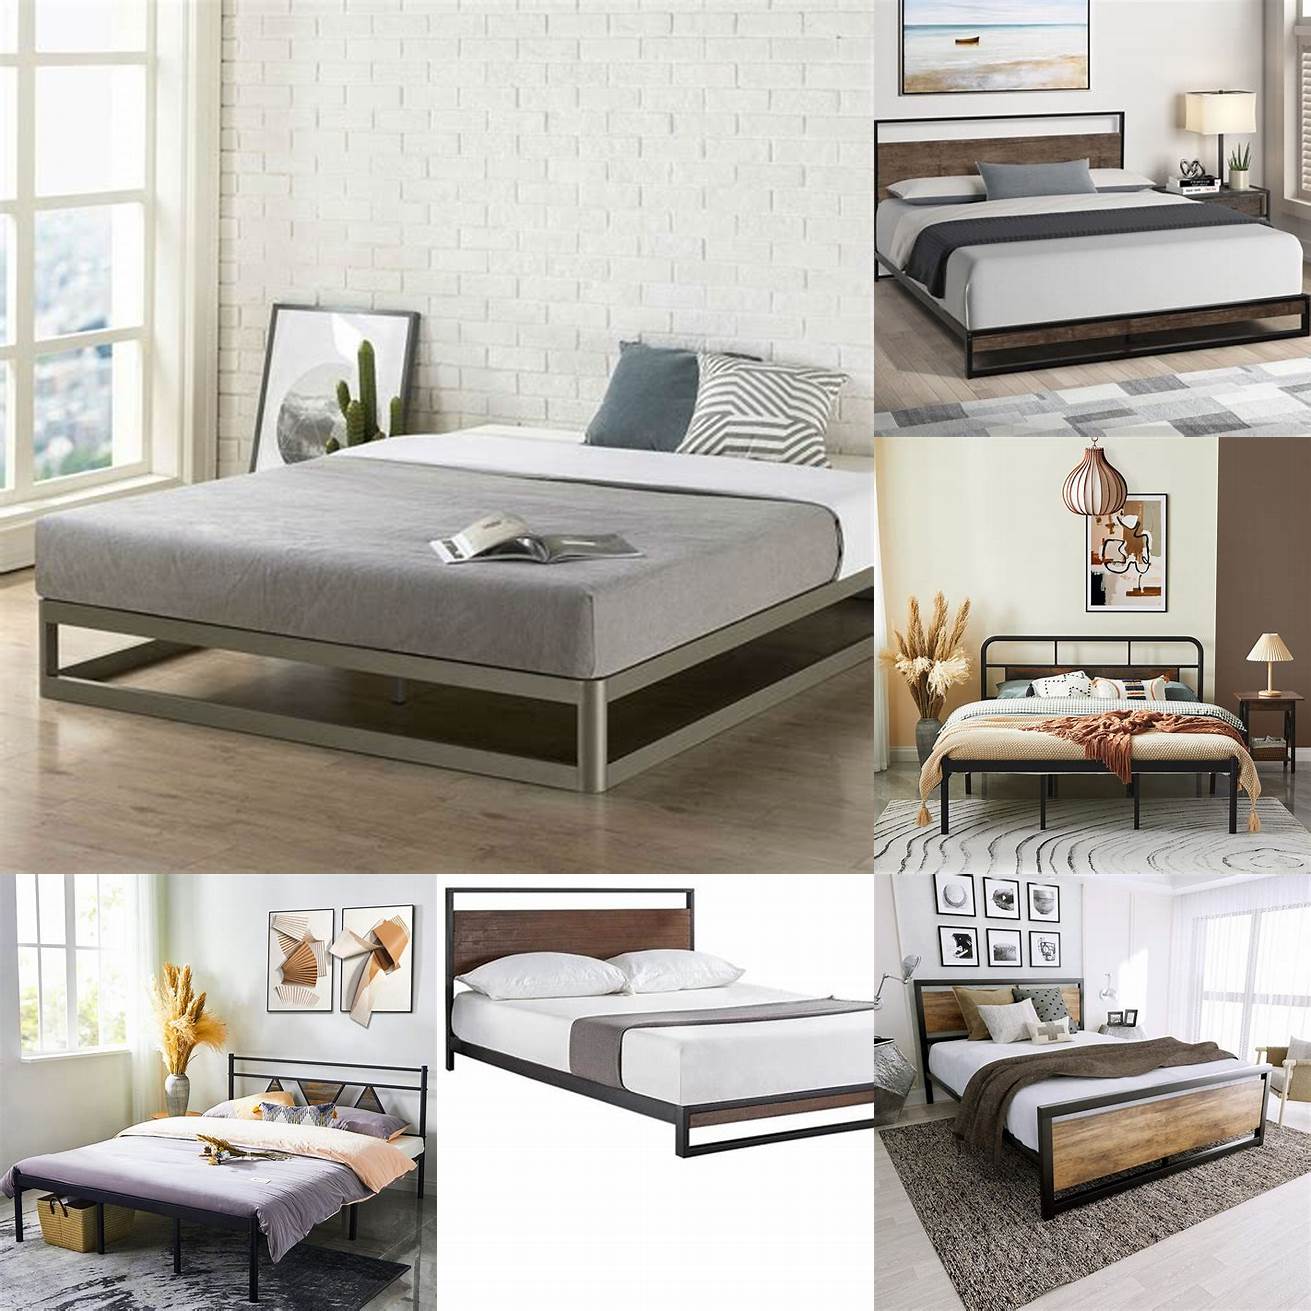 A low platform bed with a metal frame and industrial accents